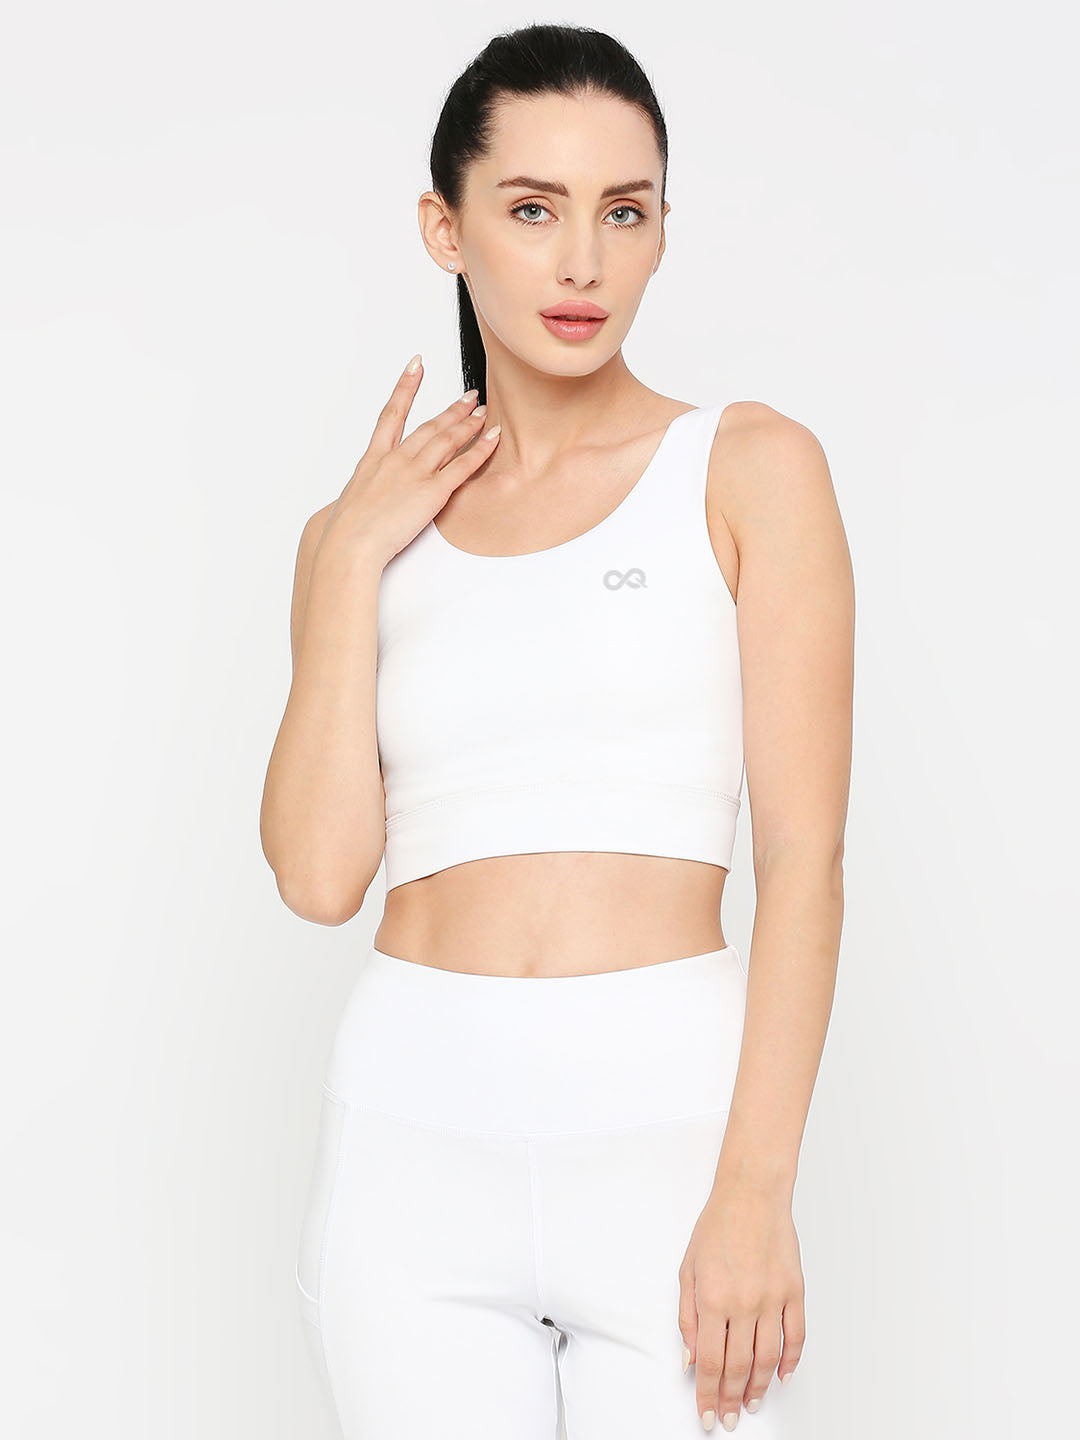 Women's White Sports Bra - Stay Supported and Stylish